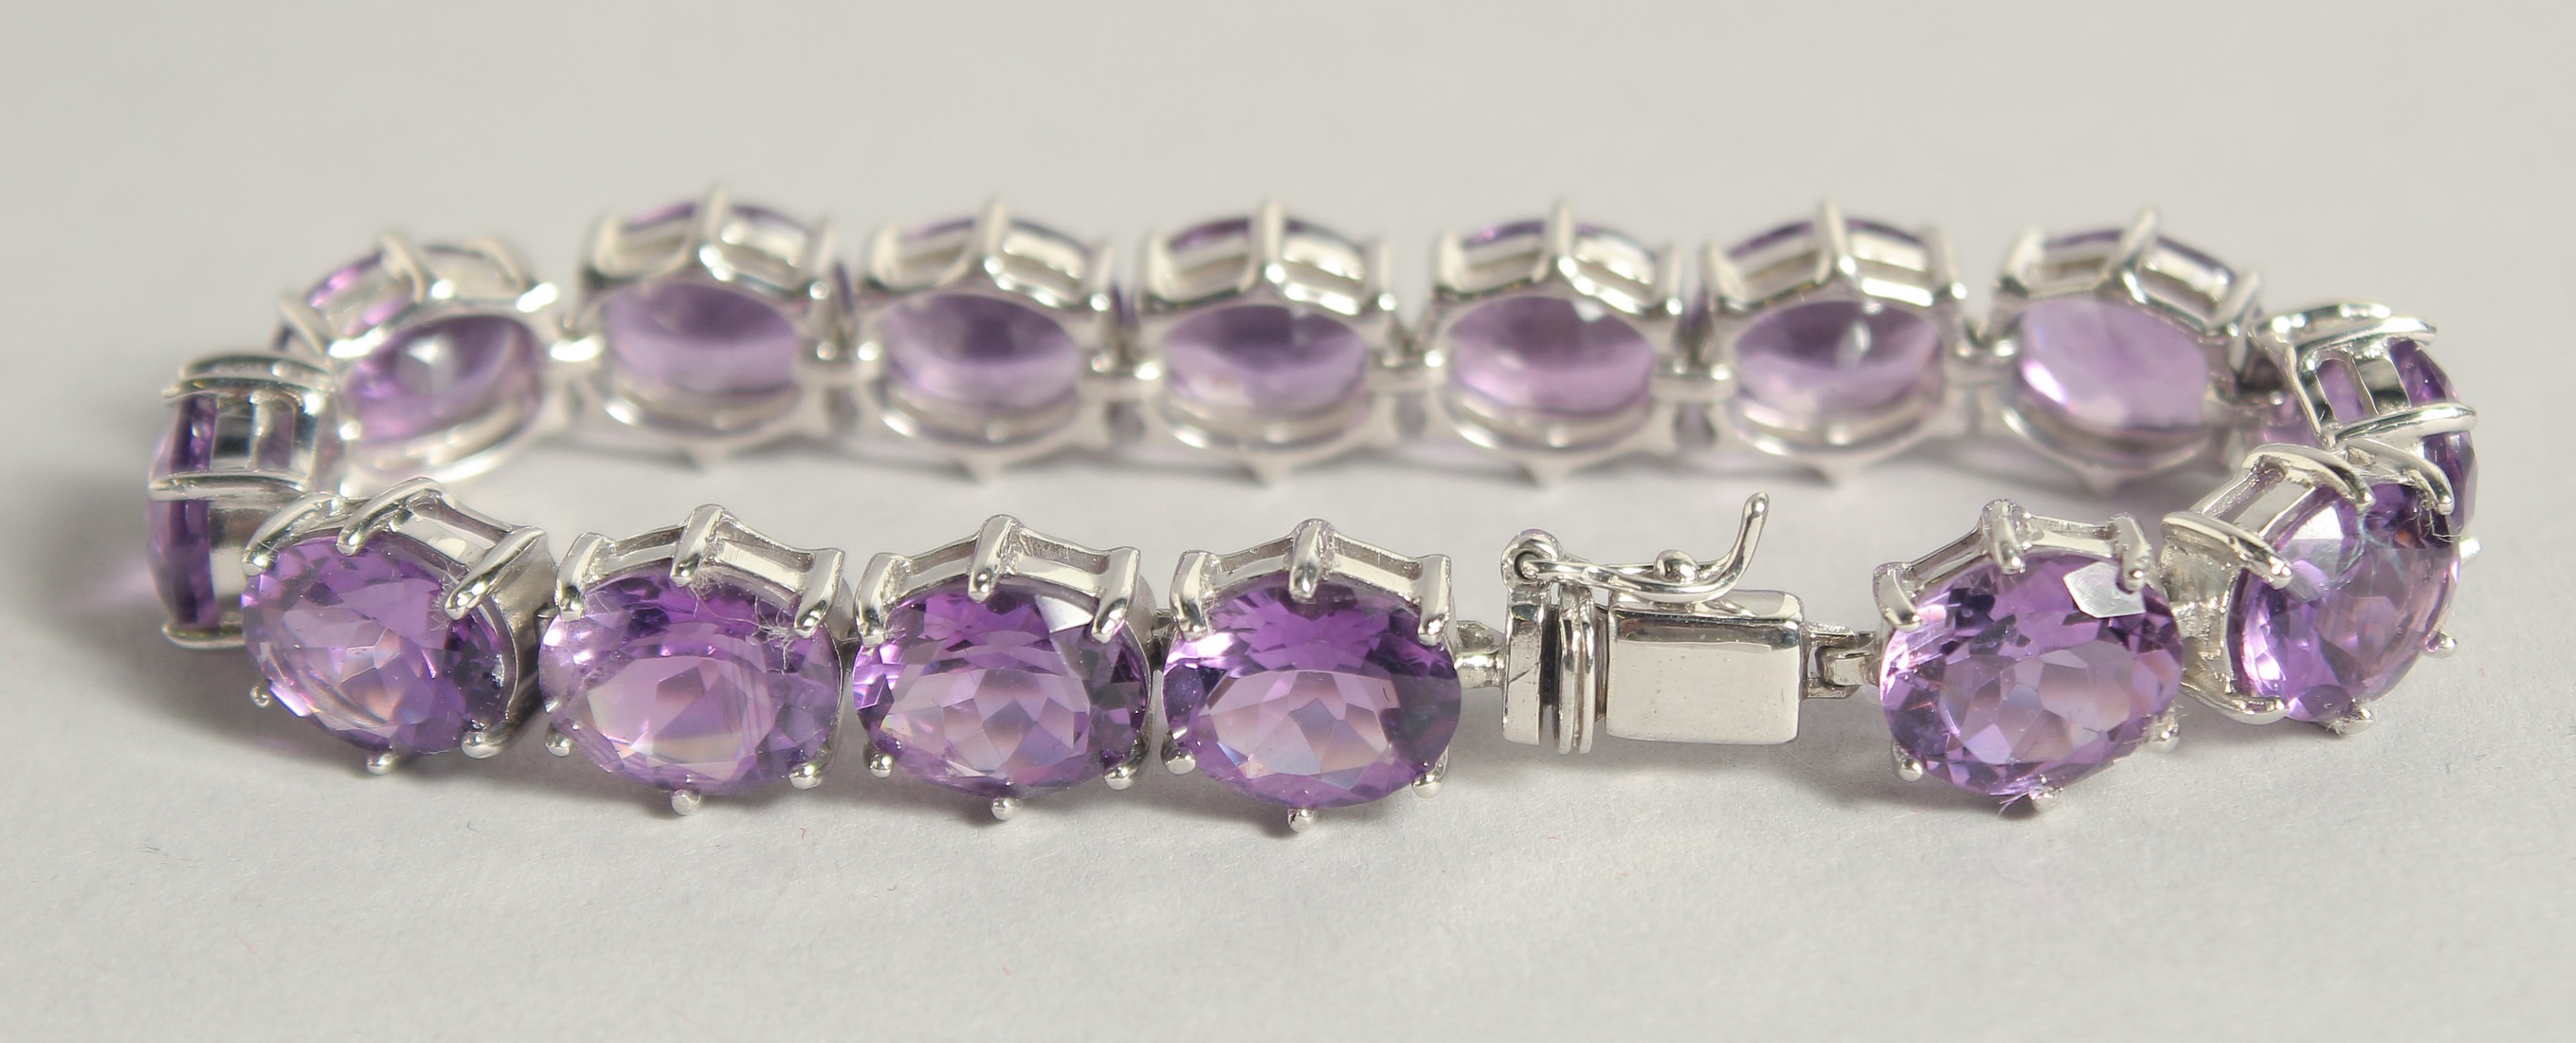 A SILVER BRACELET WITH FIFTEEN REAL AMETHYSTS. - Image 2 of 2